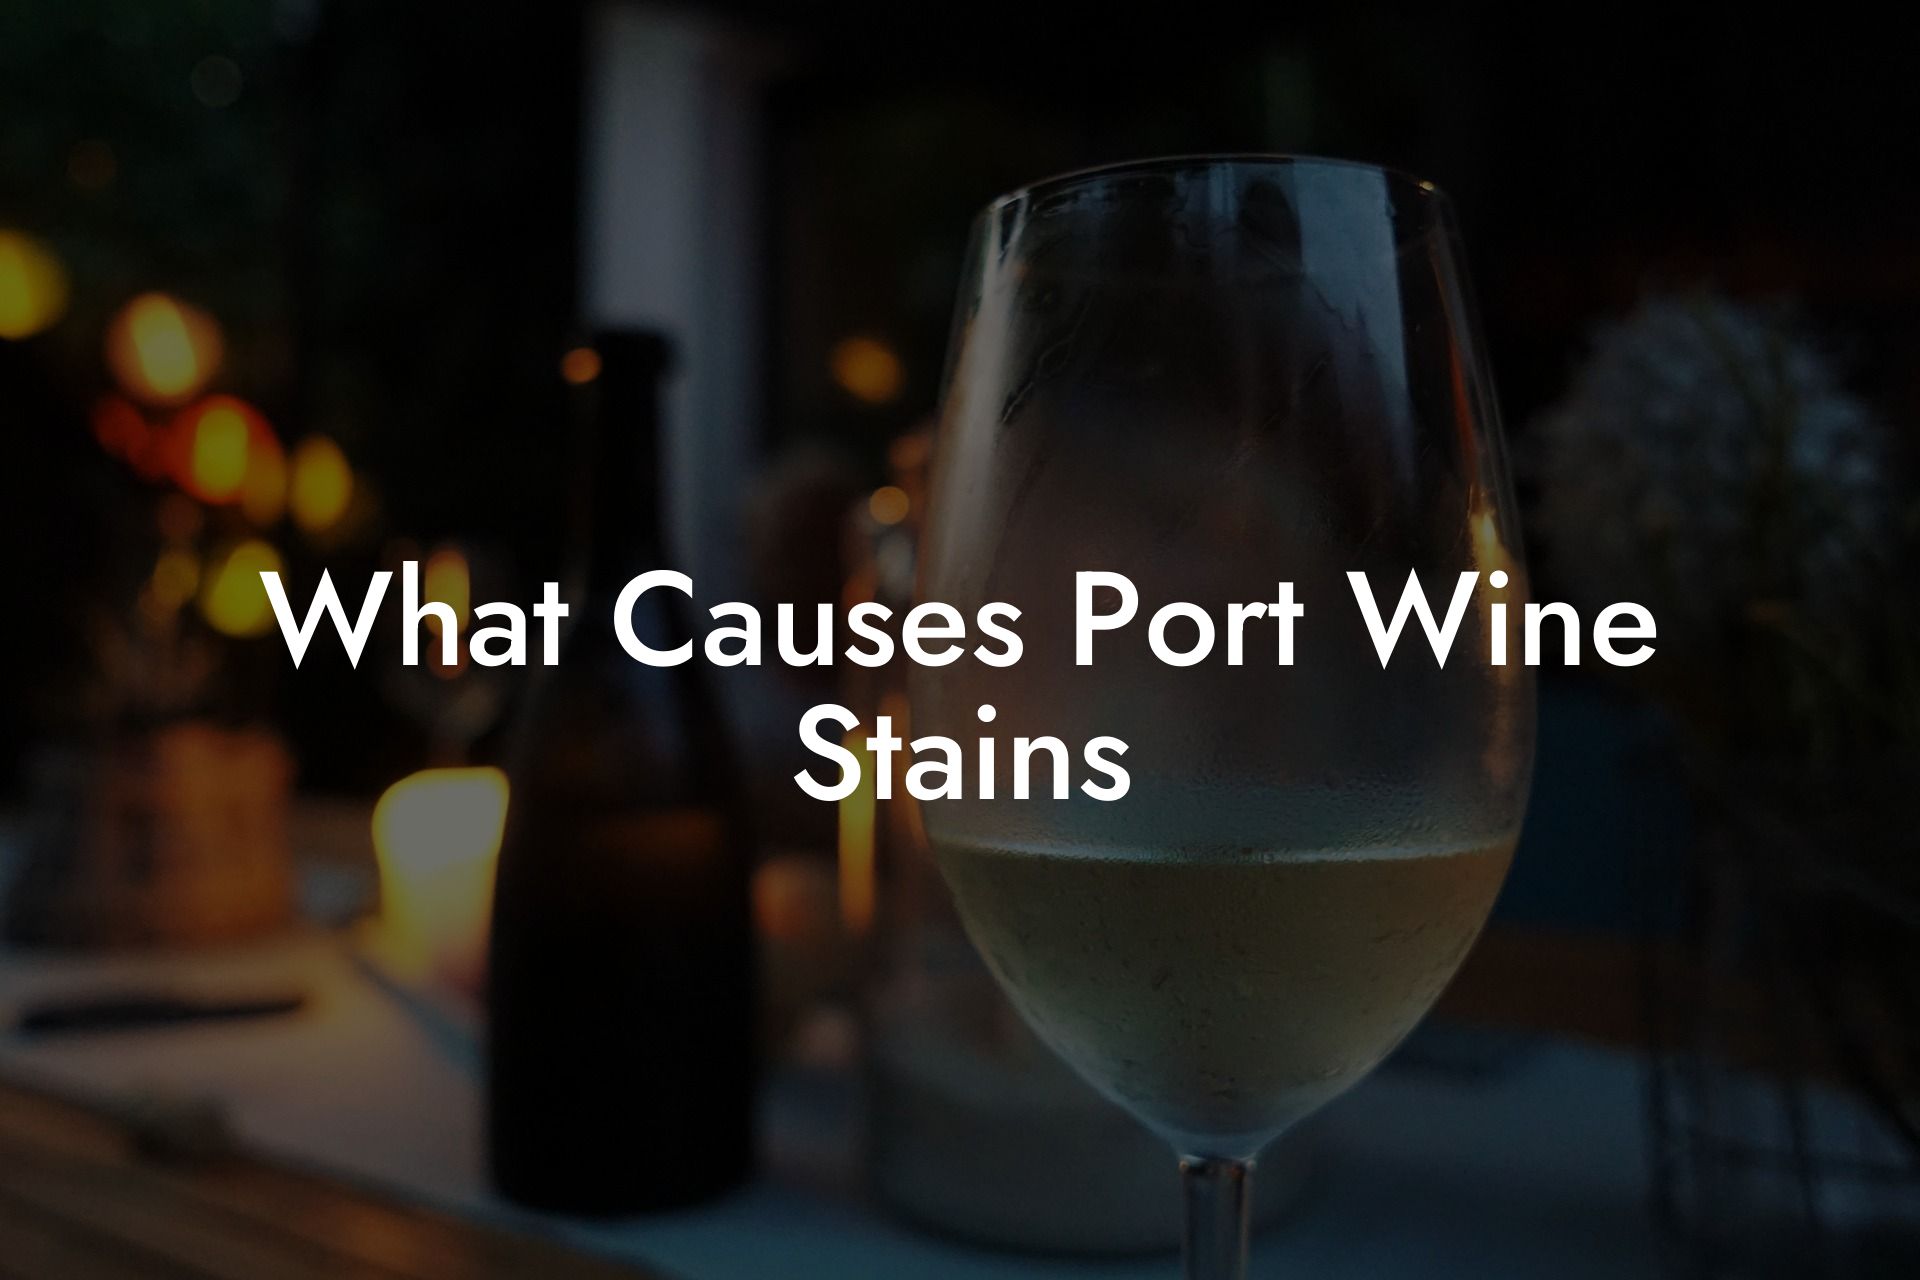 What Causes Port Wine Stains